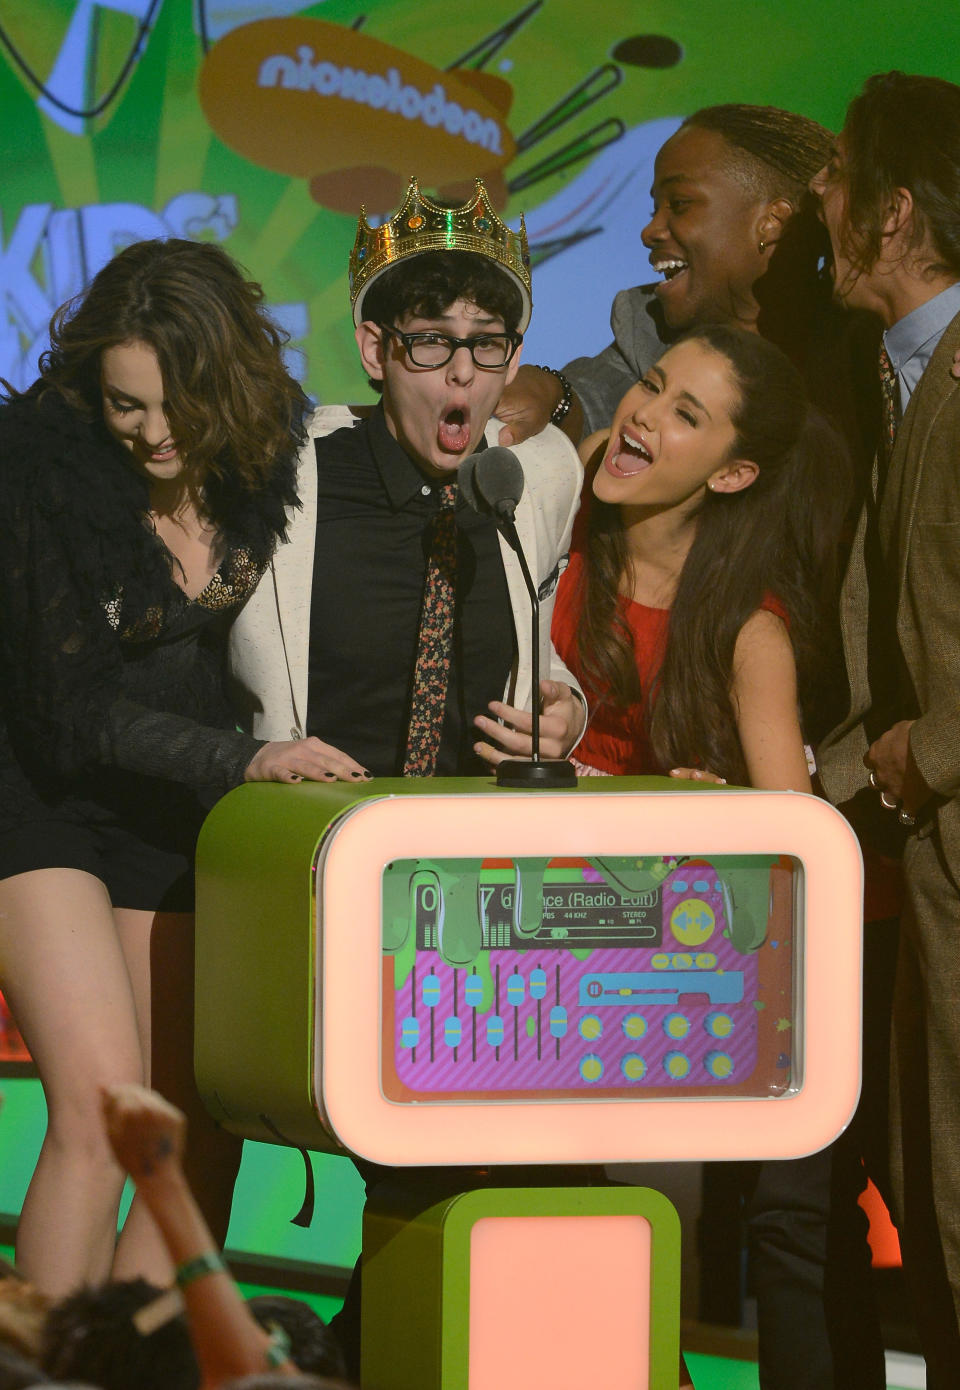 LOS ANGELES, CA - MARCH 23:  (L-R) Actors Elizabeth Gillies, Matt Bennett, Ariana Grande, Leon Thomas III and Avan Jogia accept the Favorite TV Show Award for 'Victorious' onstage during Nickelodeon's 26th Annual Kids' Choice Awards at USC Galen Center on March 23, 2013 in Los Angeles, California.  (Photo by Kevork Djansezian/Getty Images for KCA)